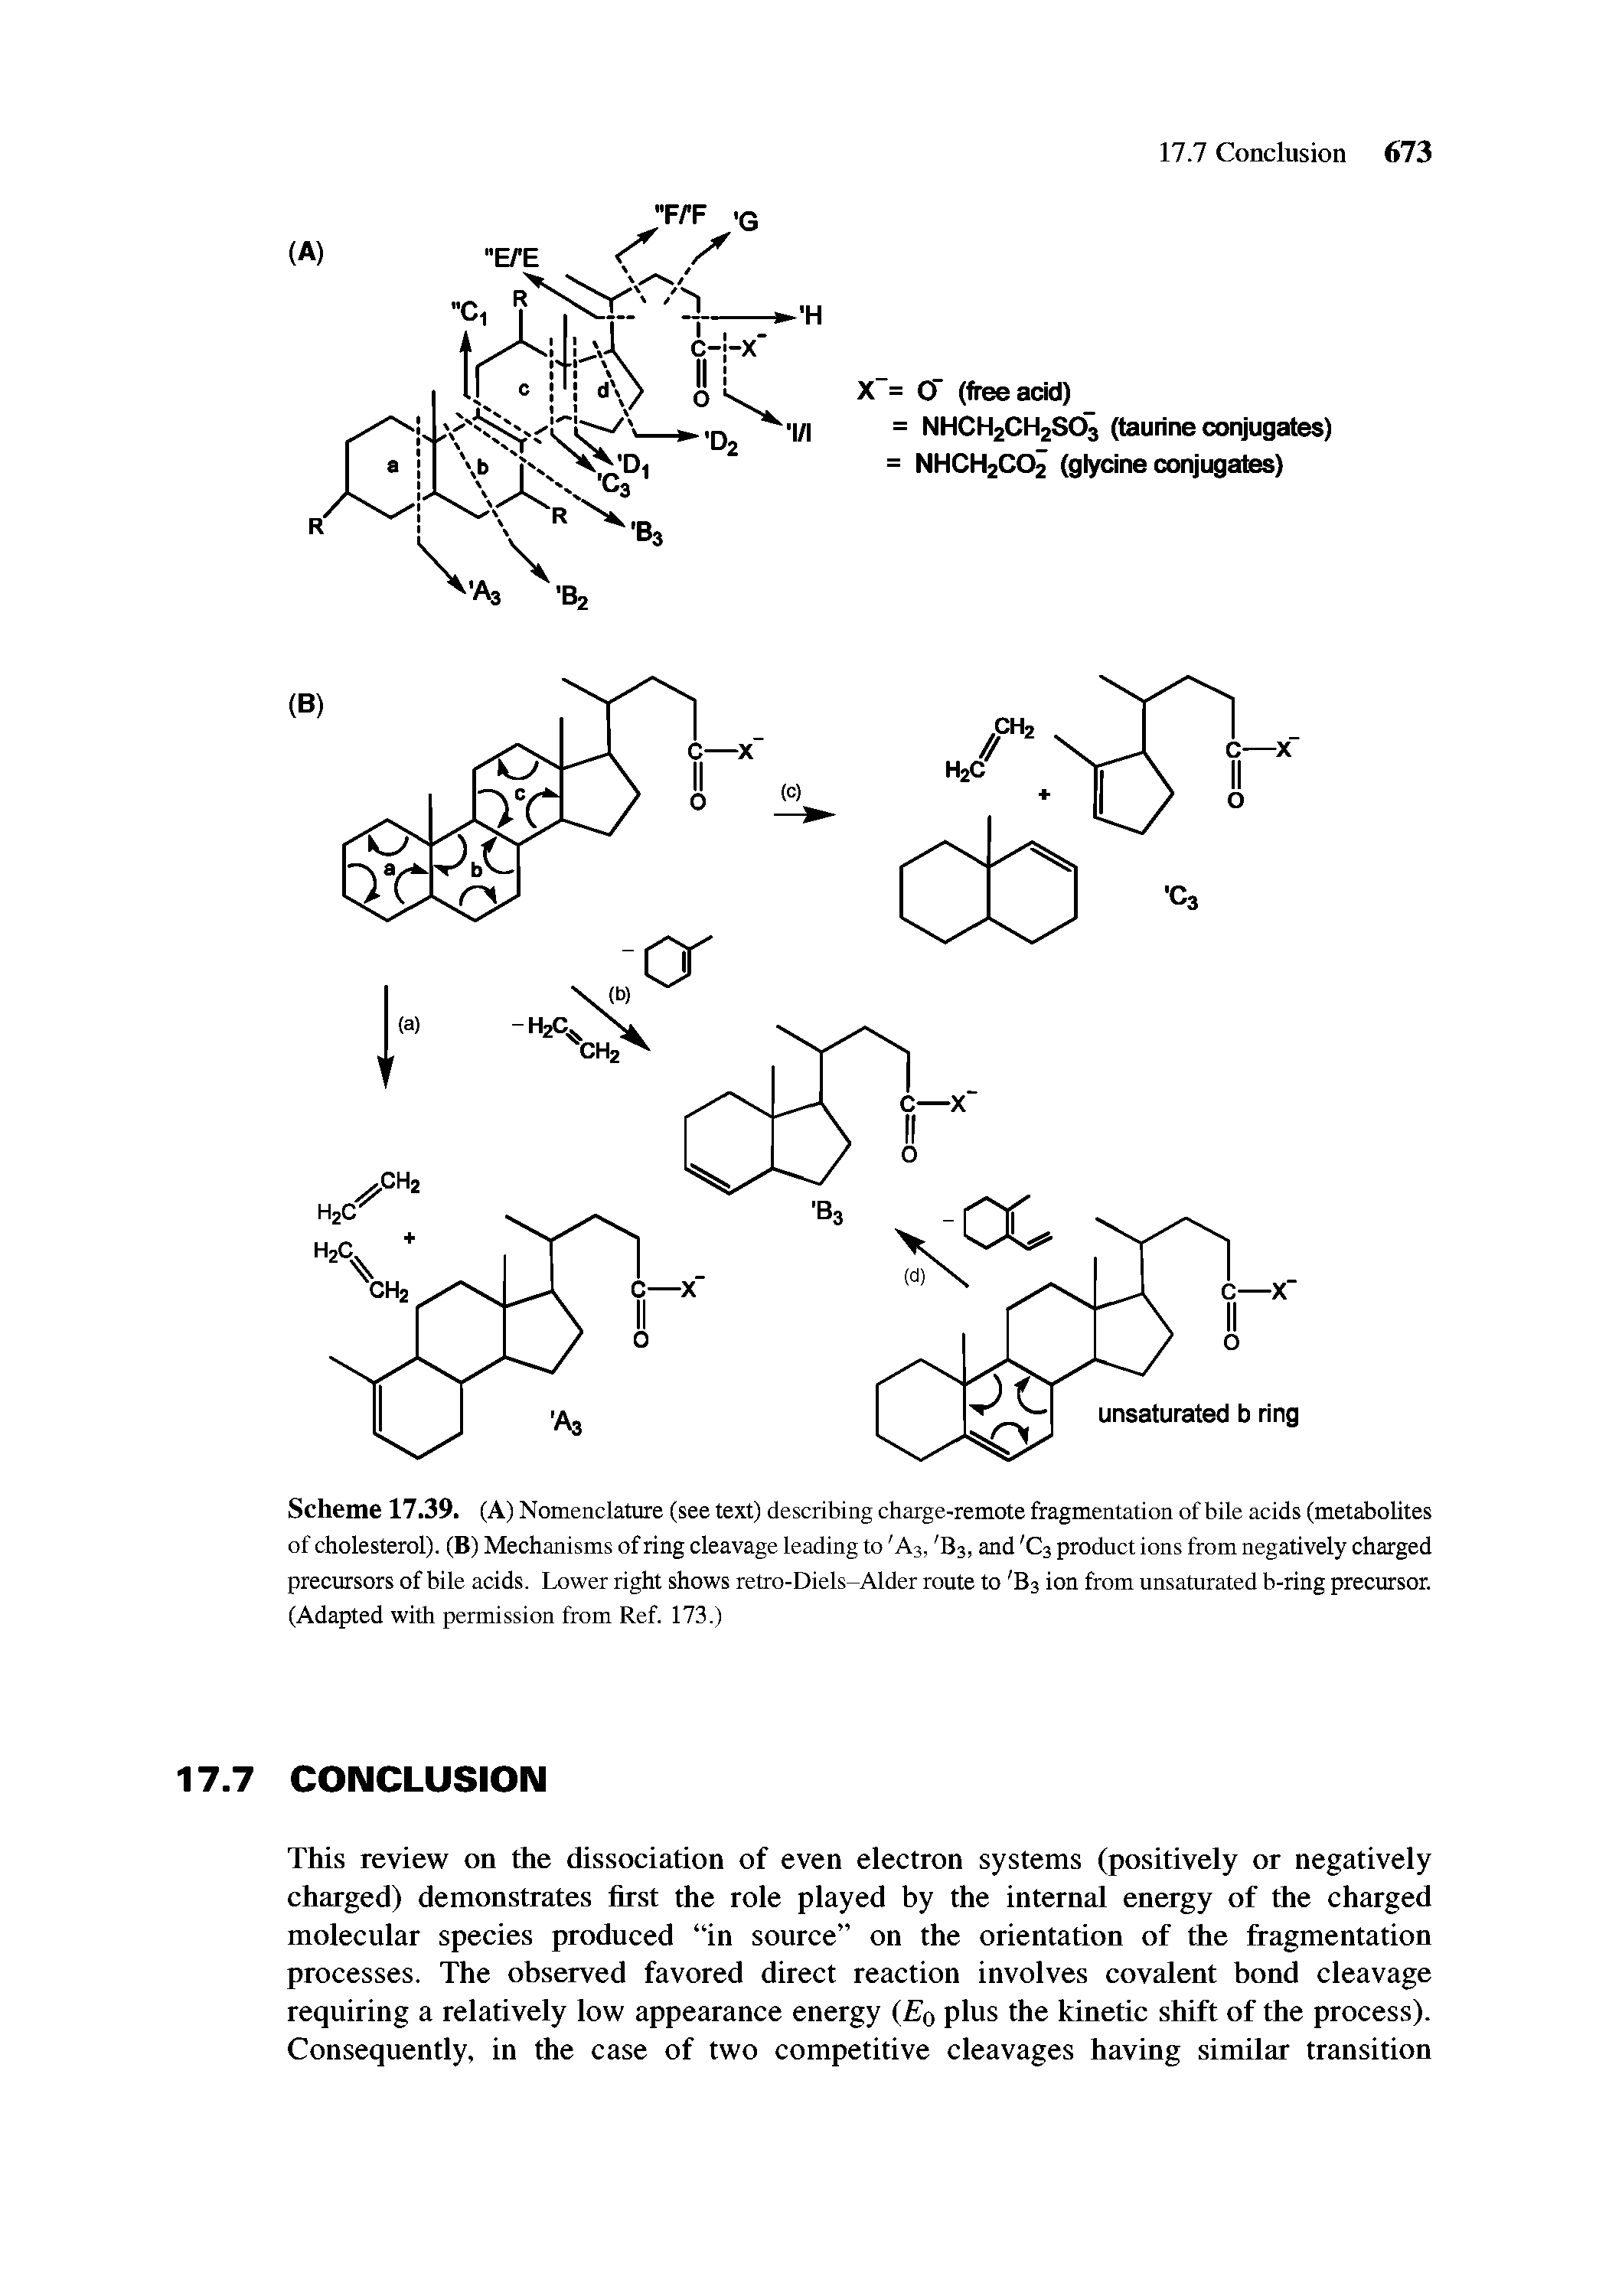 Scheme 17.39. (A) Nomenclature (see text) describing charge-remote fragmentation of bile acids (metabolites of cholesterol). (B) Mechanisms of ring cleavage leading to A3, B3, and C3 product ions from negatively charged precursors of bile acids. Lower right shows retro-Diels-Alder route to B3 ion from unsaturated b-ring precursor. (Adapted with permission from Ref. 173.)...